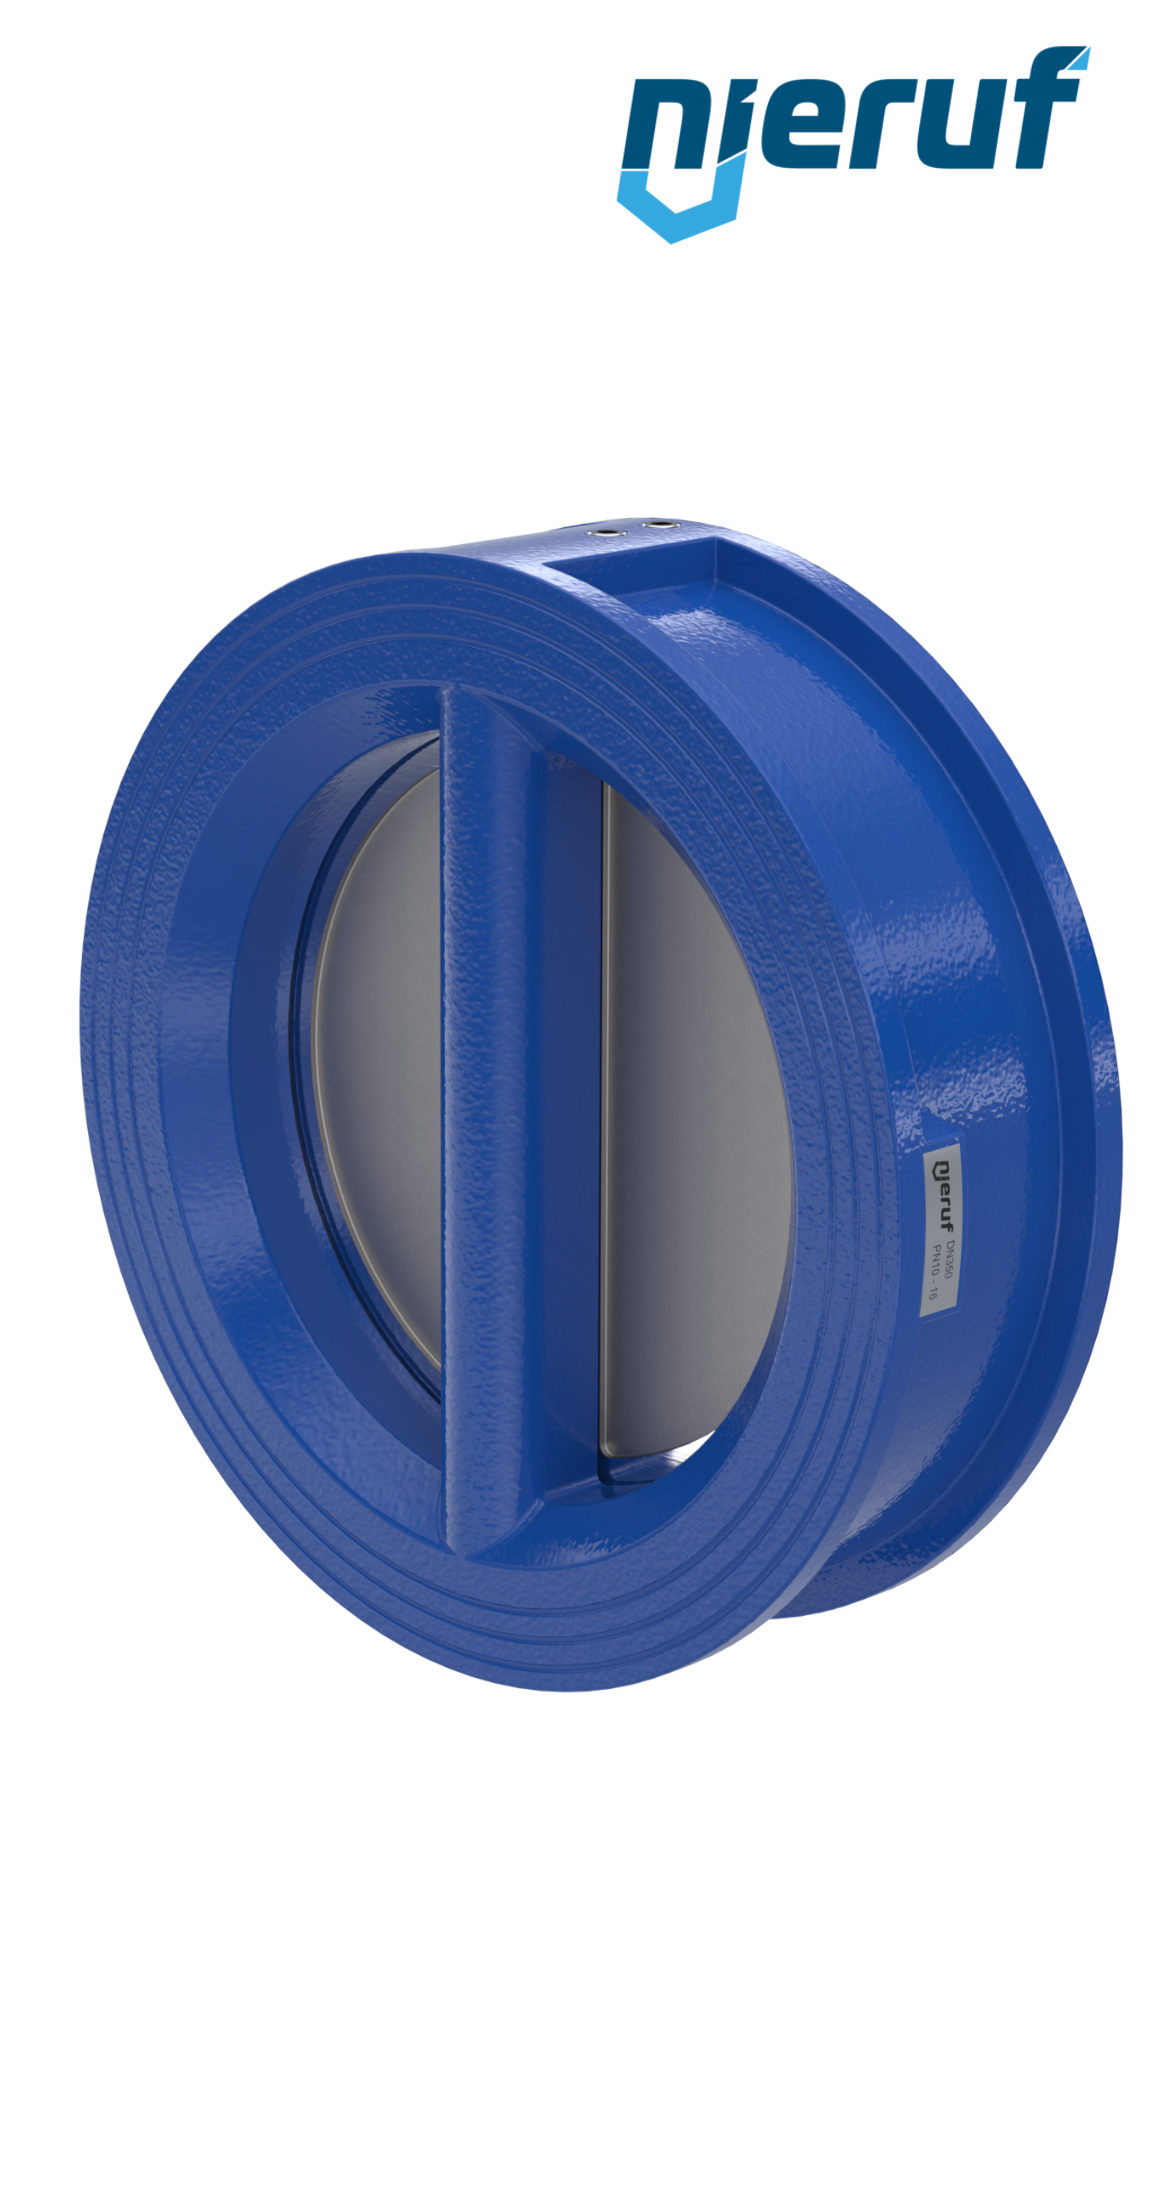 dual plate check valve DN350 DR02 GGG40 epoxyd plated blue 180µm NBR